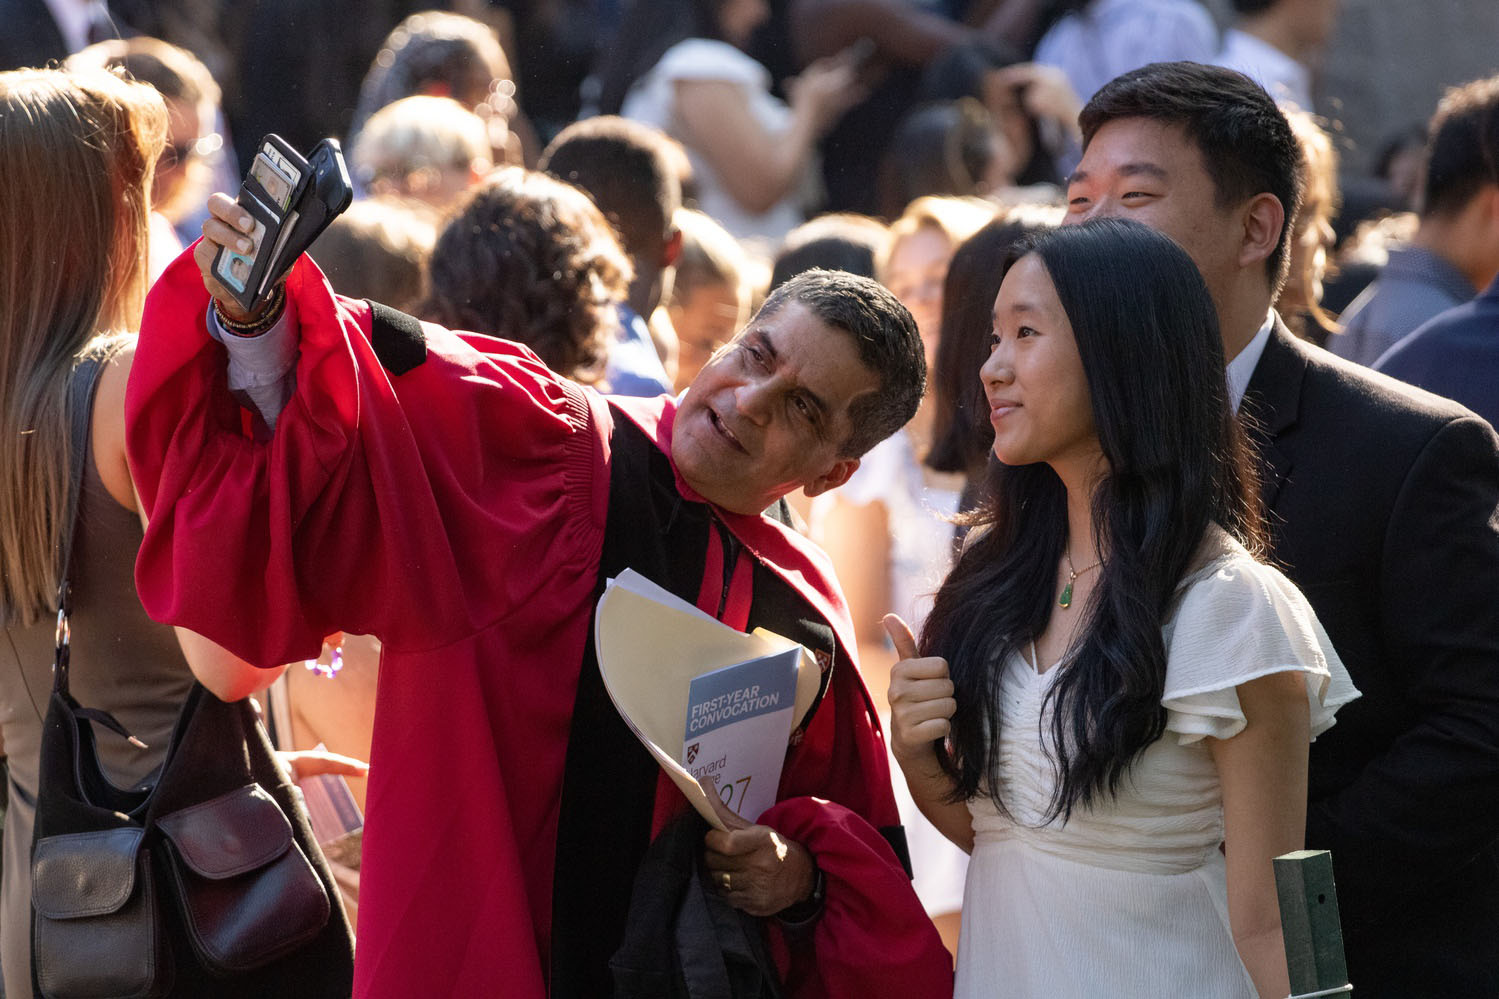 Harvard College Dean Rakesh Khurana snaps a selfie with students at the Class of 2027 Convocation.